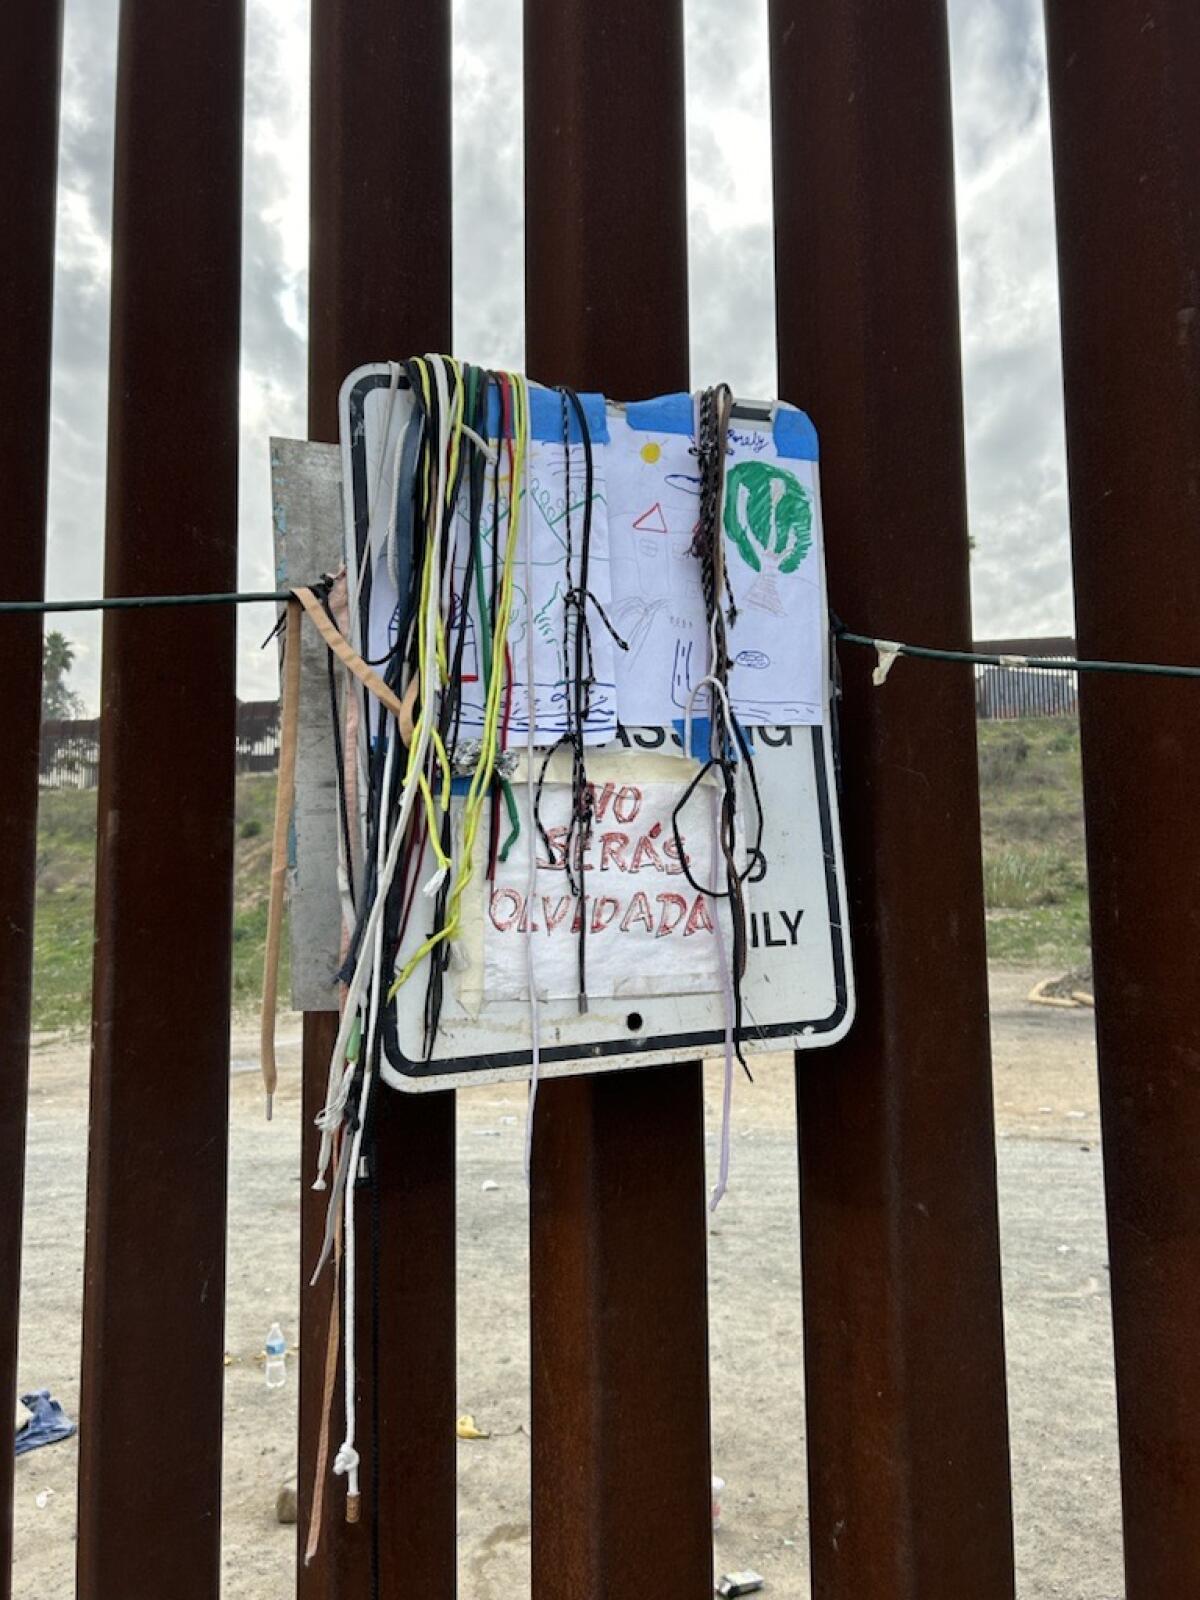 Shoelaces left behind by asylum seekers hang from a sign that reads: "U.S. property, no trespassing."